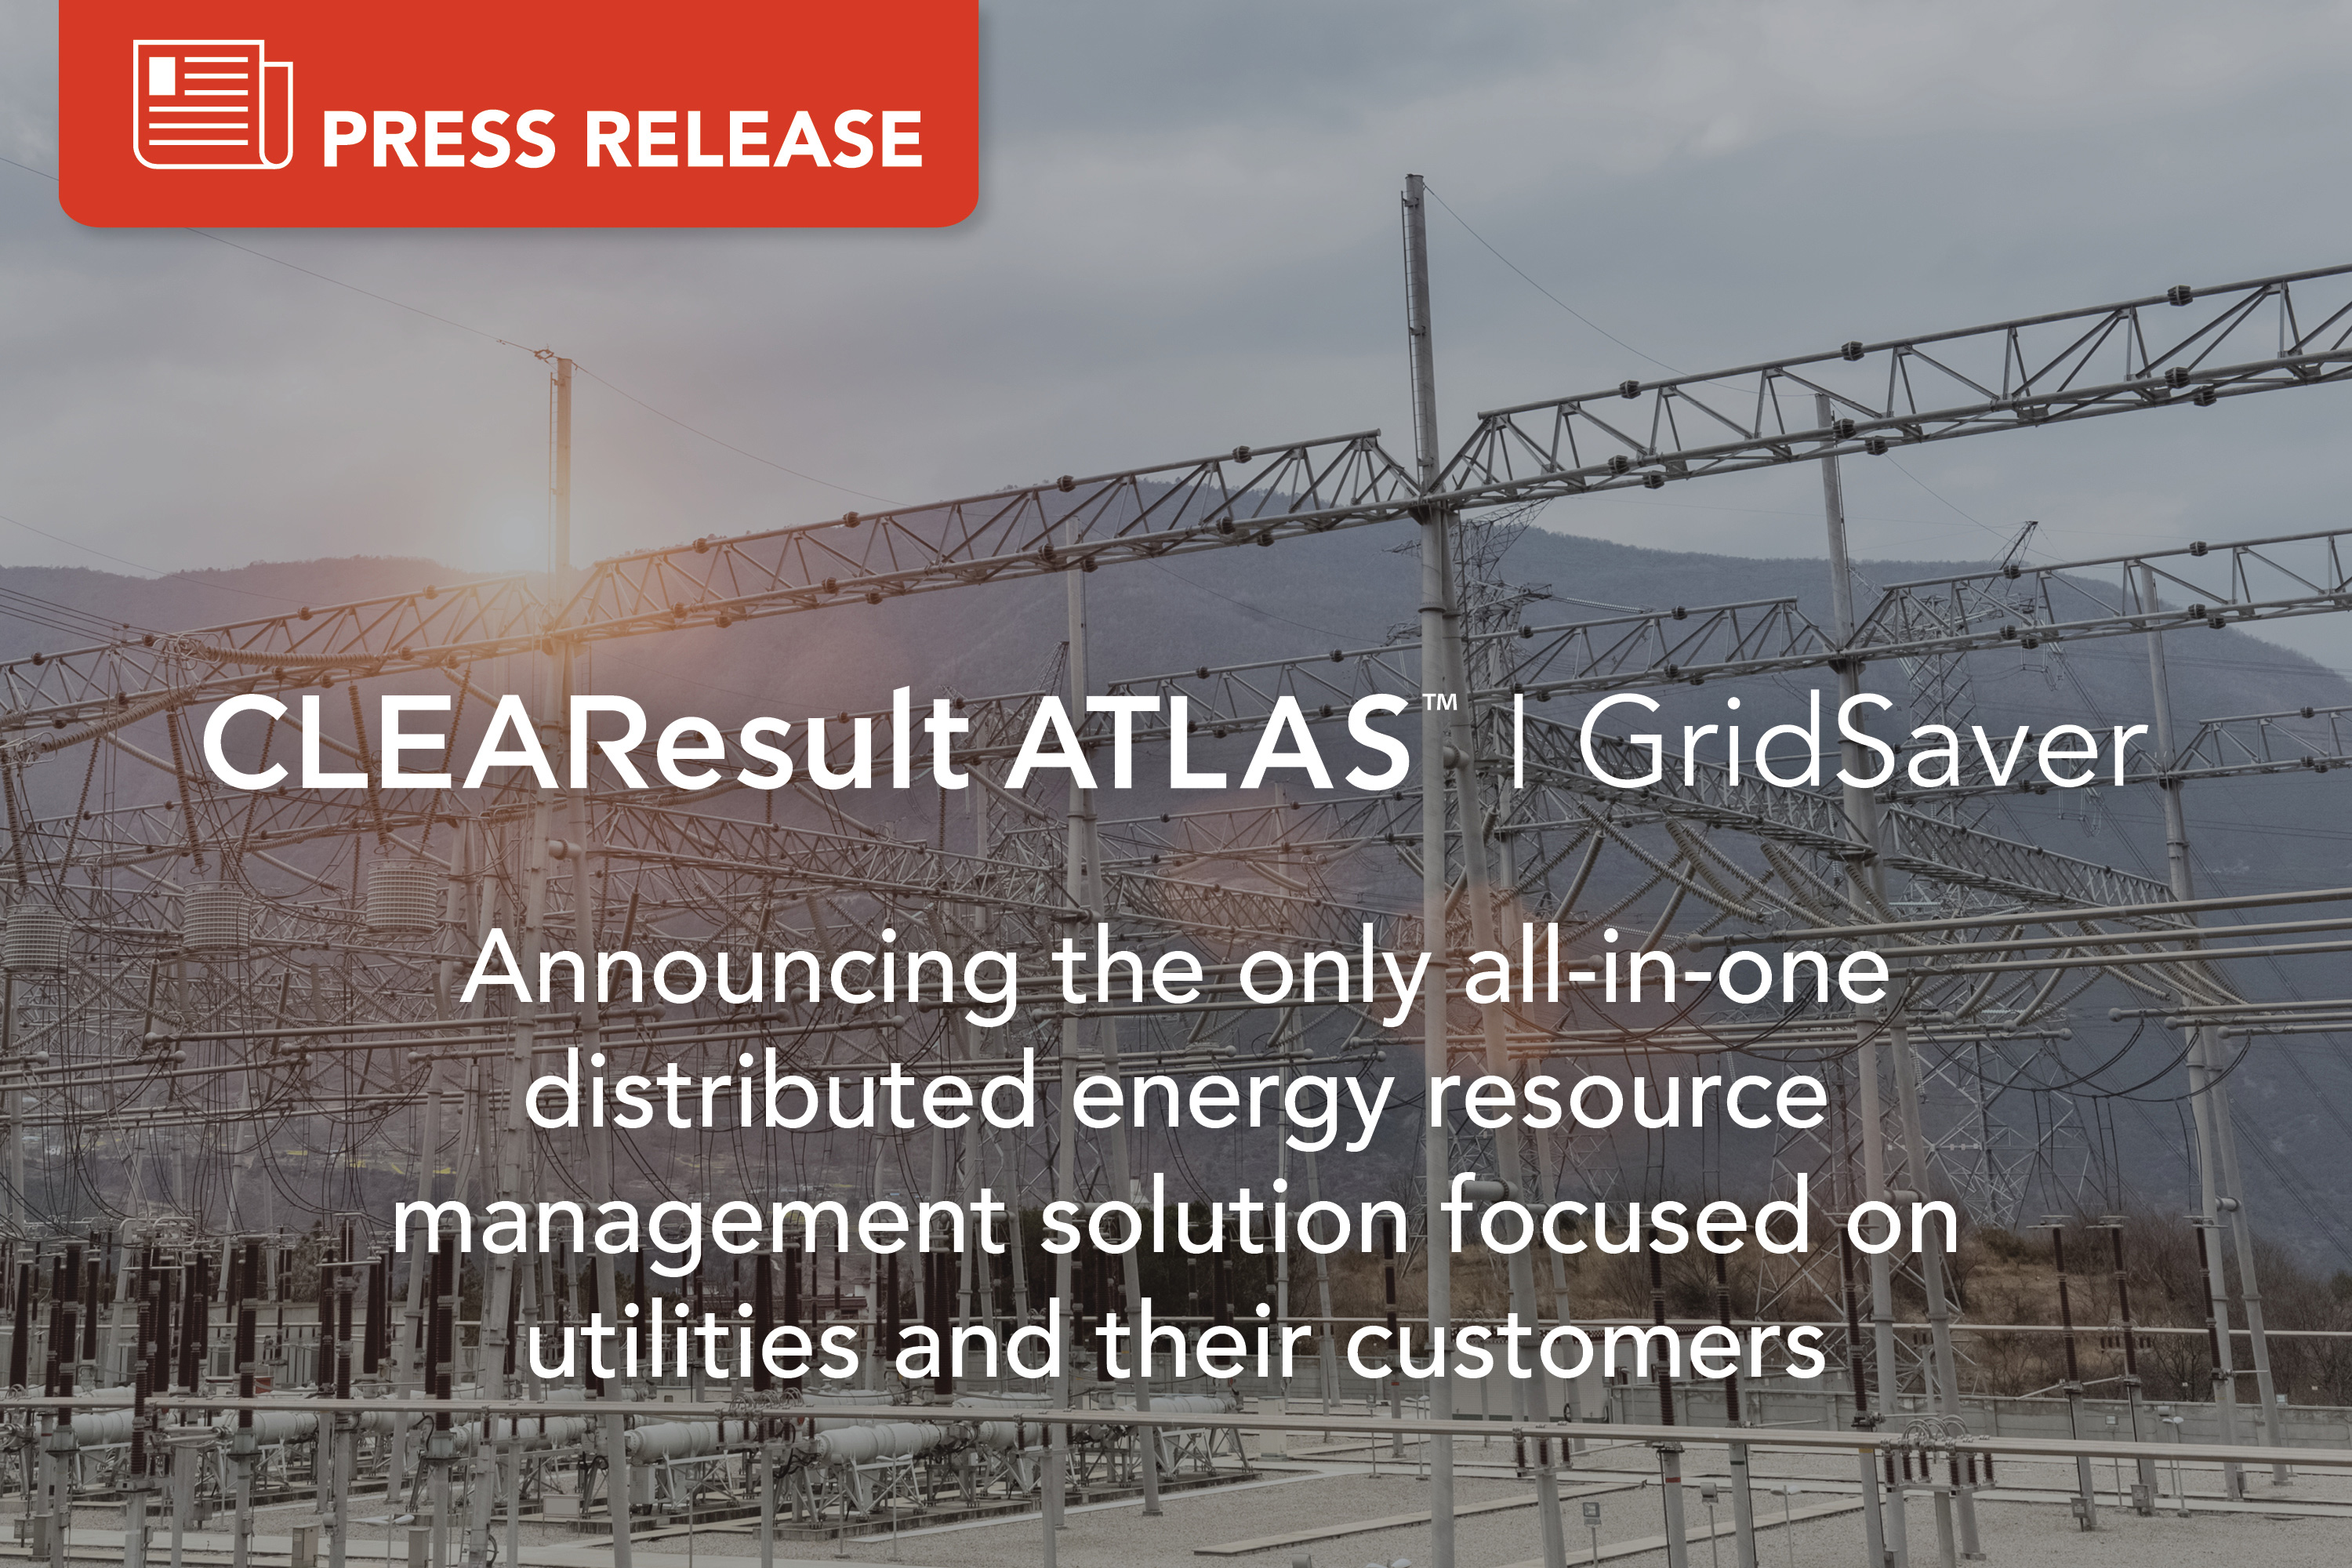 CLEAResult ATLAS™ GridSaver gives utilities and their customers an easy tool to reduce peak demand together